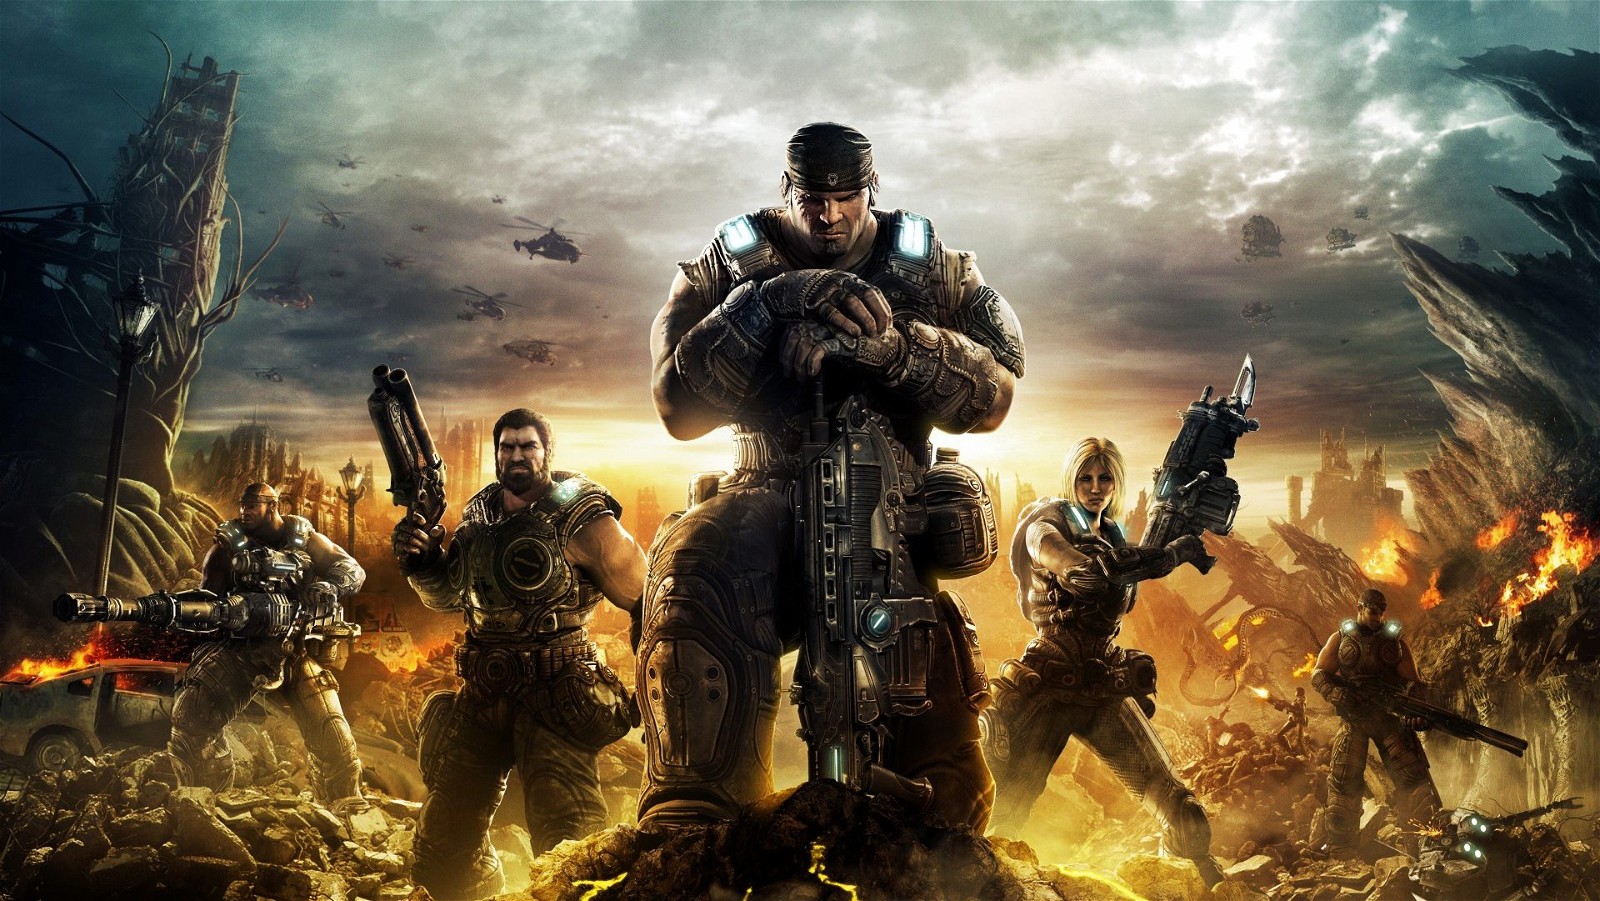 Some of the underlying themes in the Xbox exclusive Gears of War trilogy are quite disturbing.